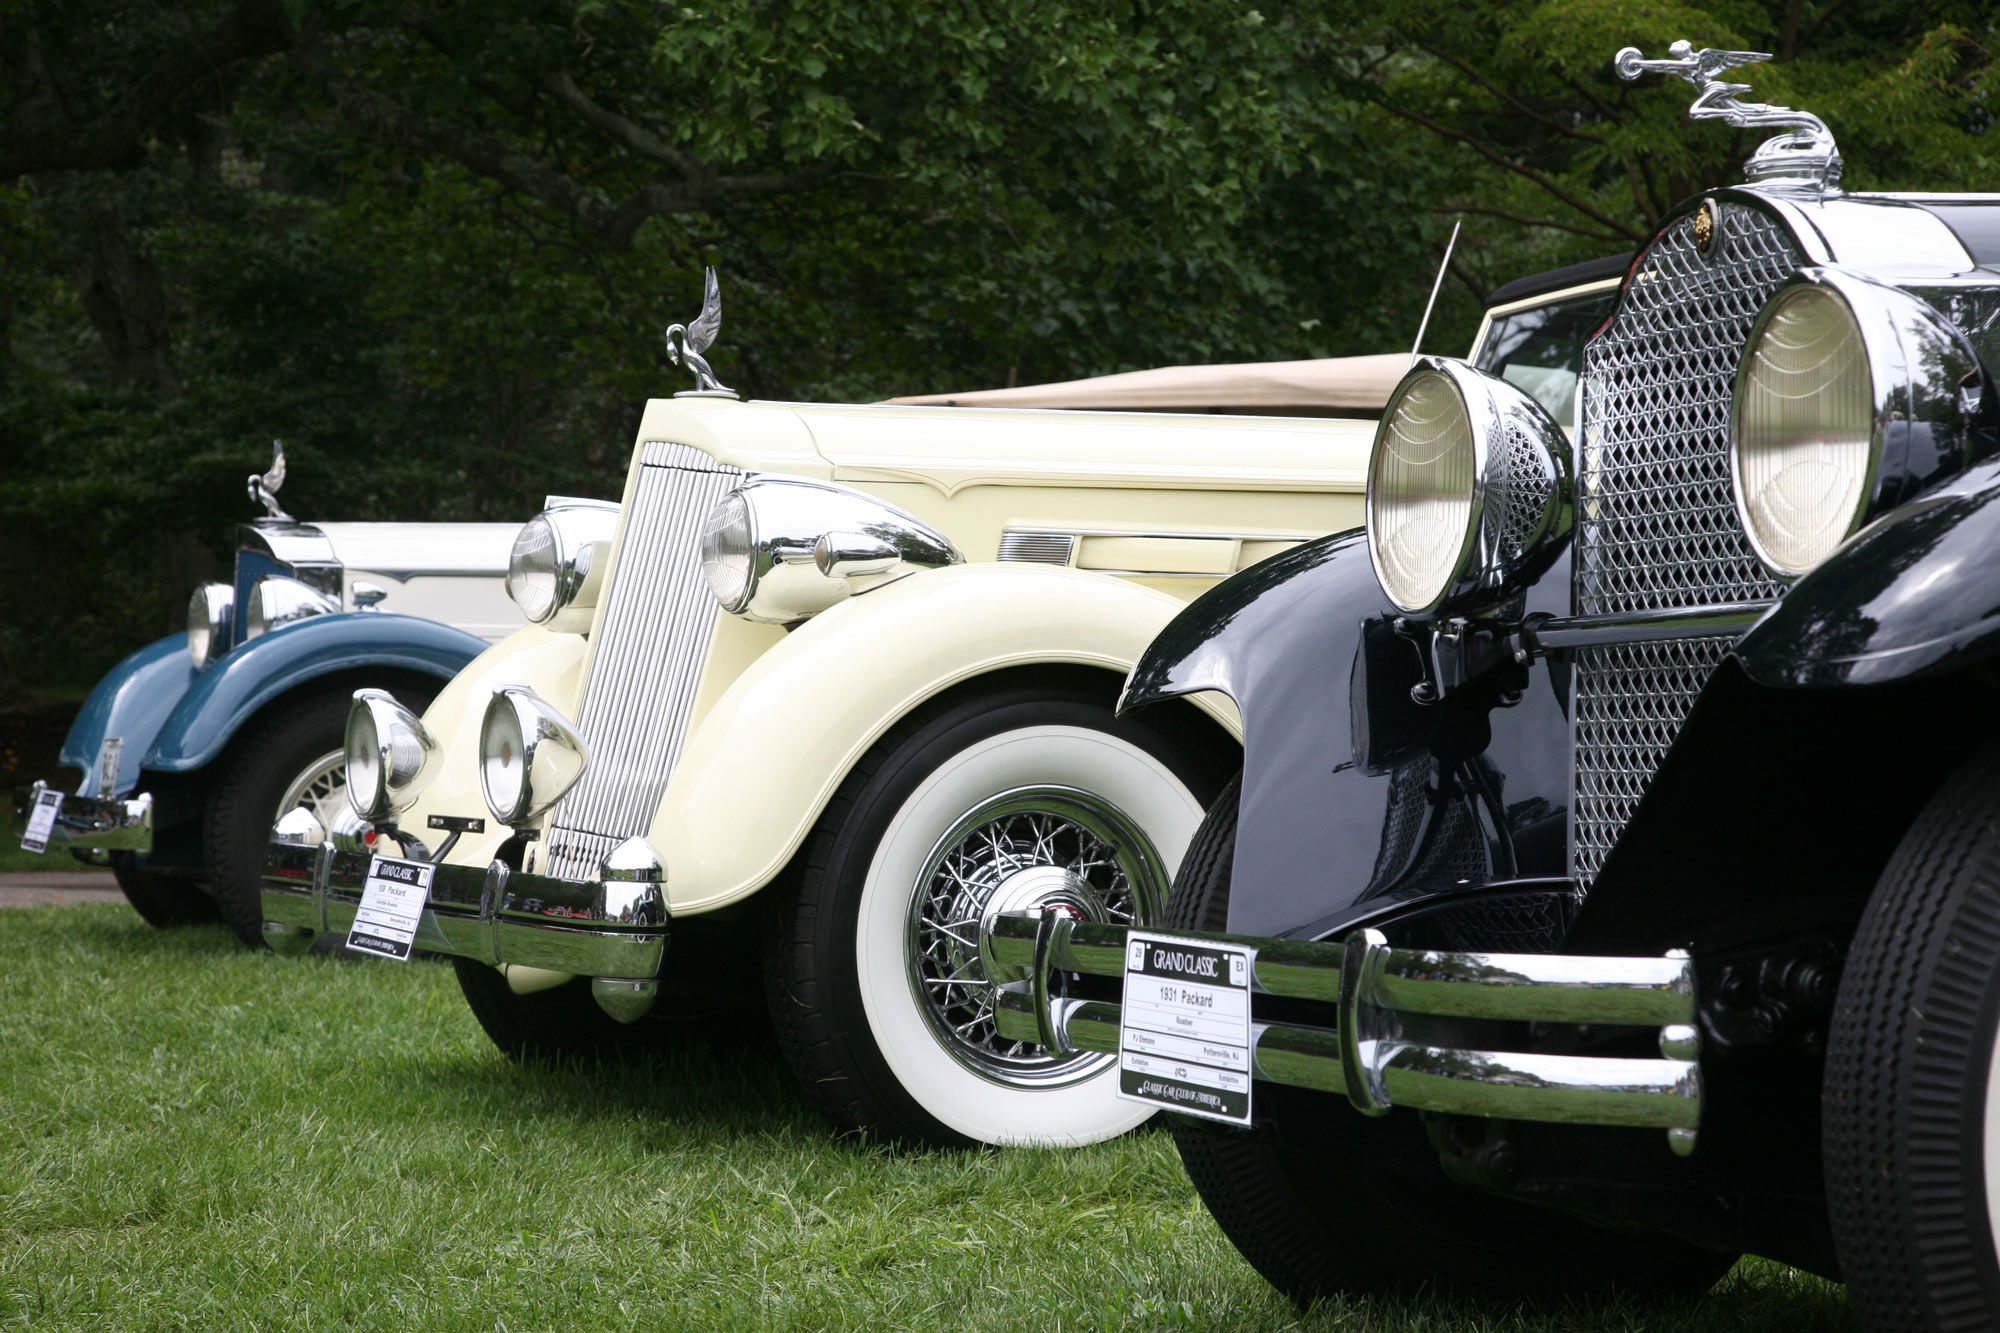 This is a photo of three classic cars insured through Stonewall Insurance Group